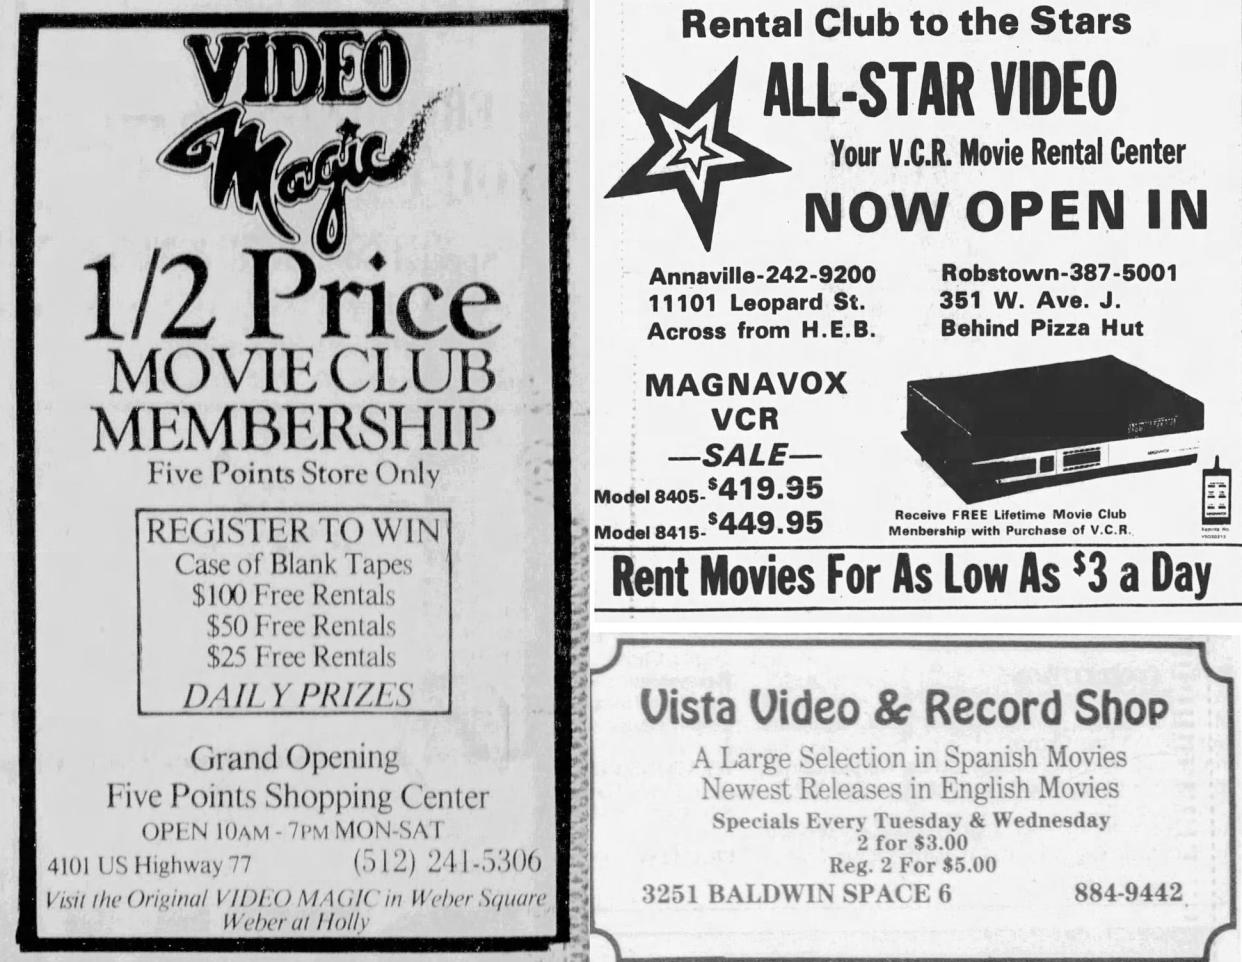 Video rental stores advertised in the Caller-Times during the 1980s, including Video Magic, All-Star Video and Vista Video.